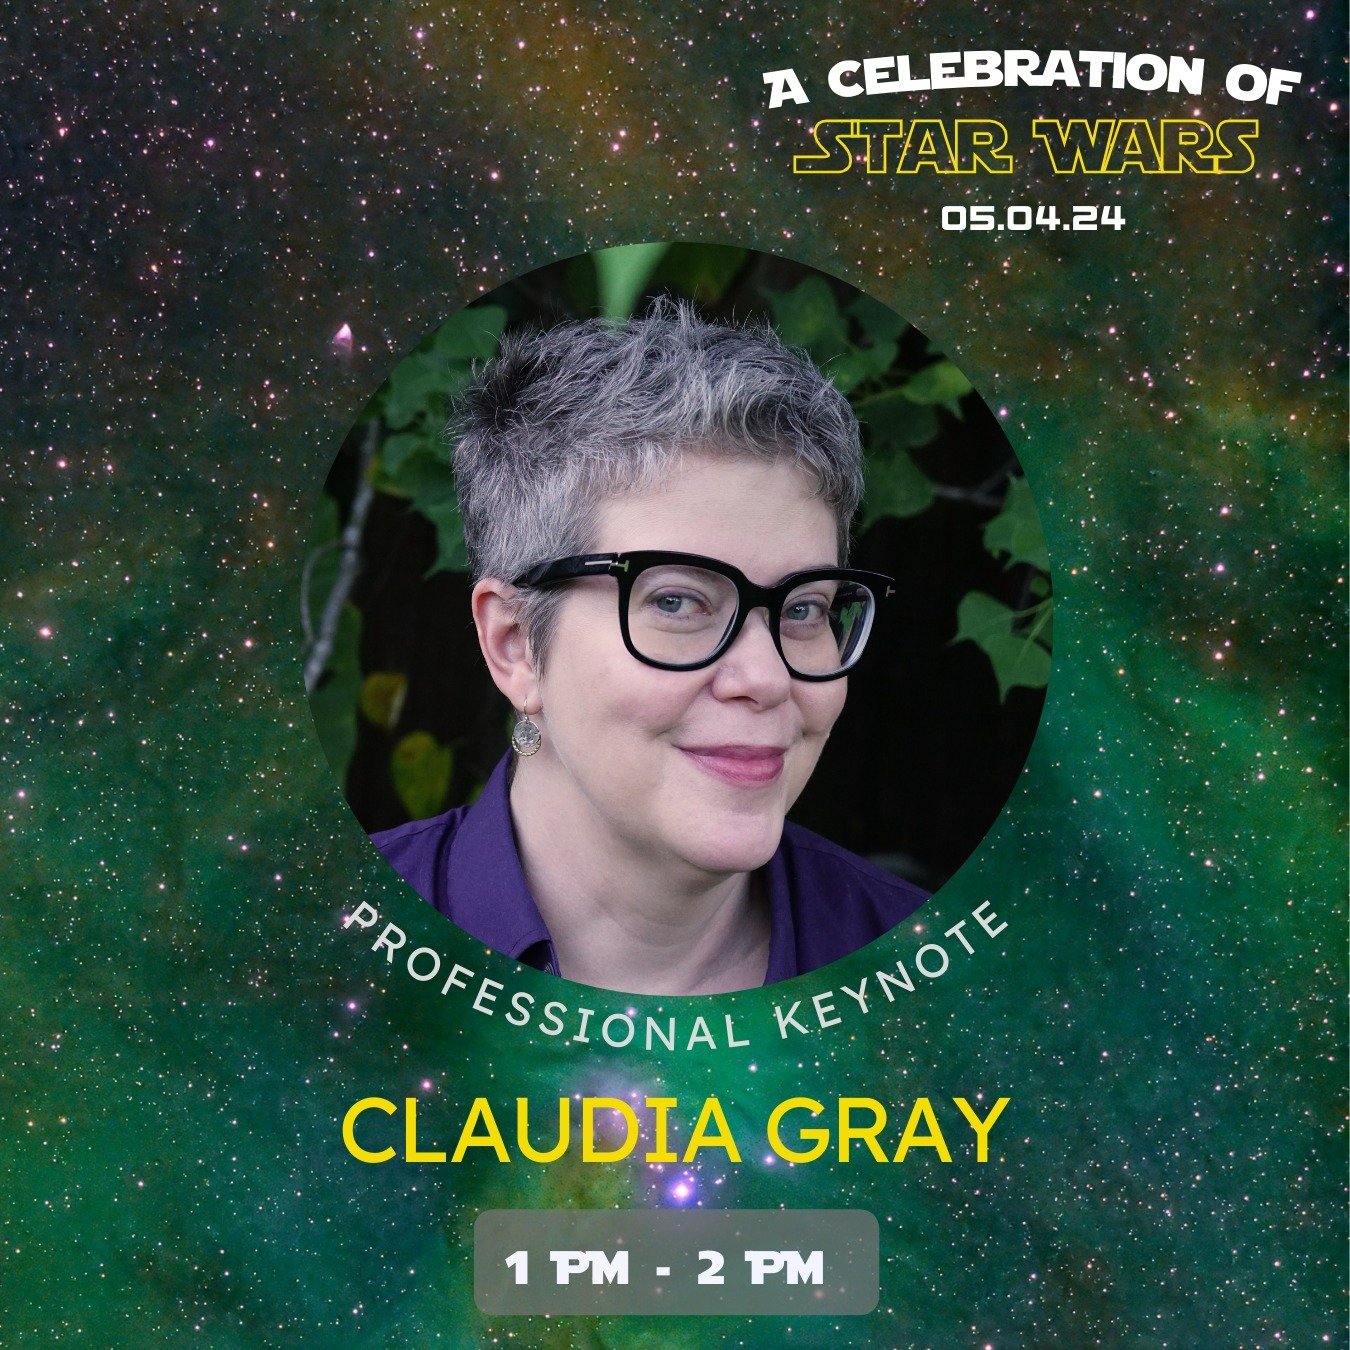 We&rsquo;re thrilled to welcome Claudia Gray, the author of Star Wars: Bloodline, Leia, Lost Stars, Master and Apprentice as our professional keynote speaker! You can tune into her presentation in person in Room 805 or online from 1 pm - 2 pm!